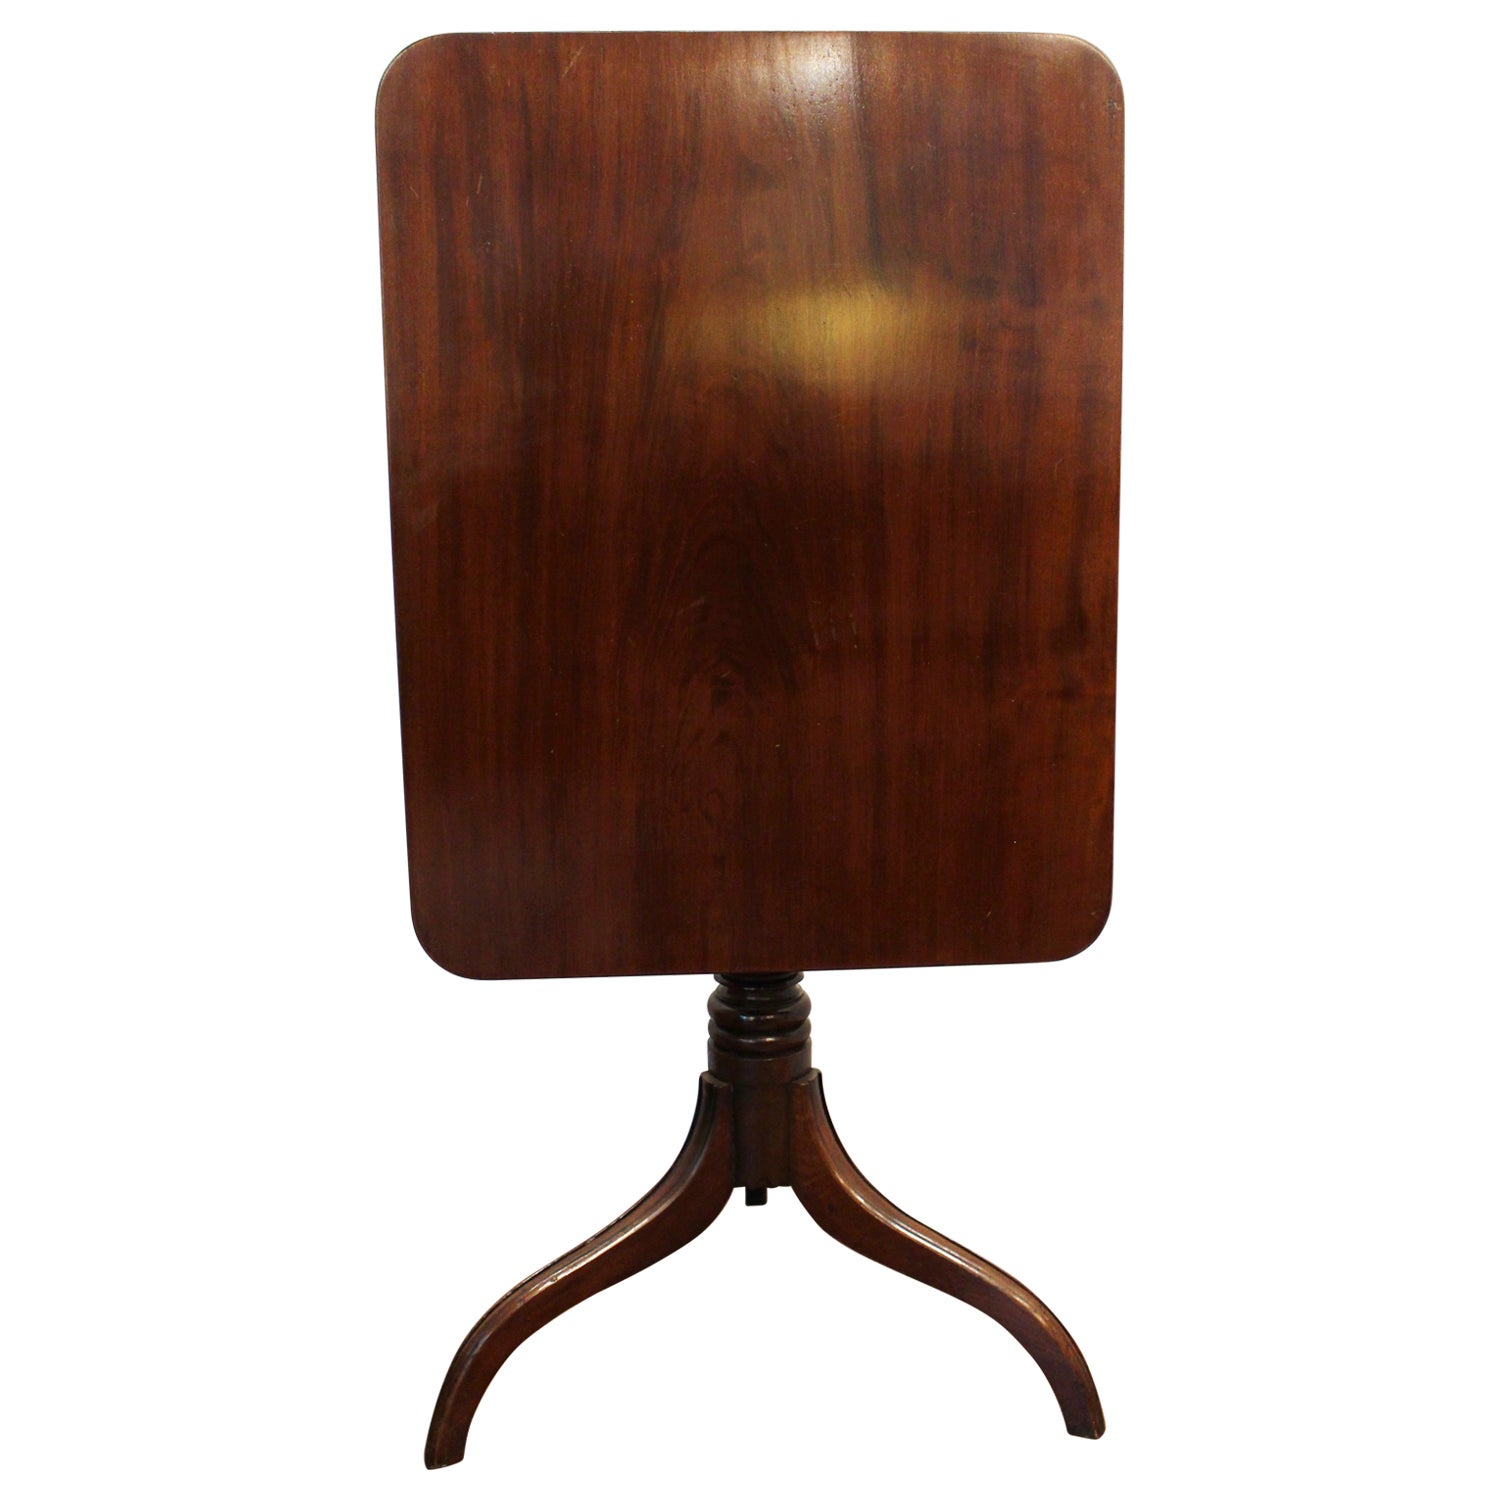 Early 19th Century English Tilt-Top Table For Sale